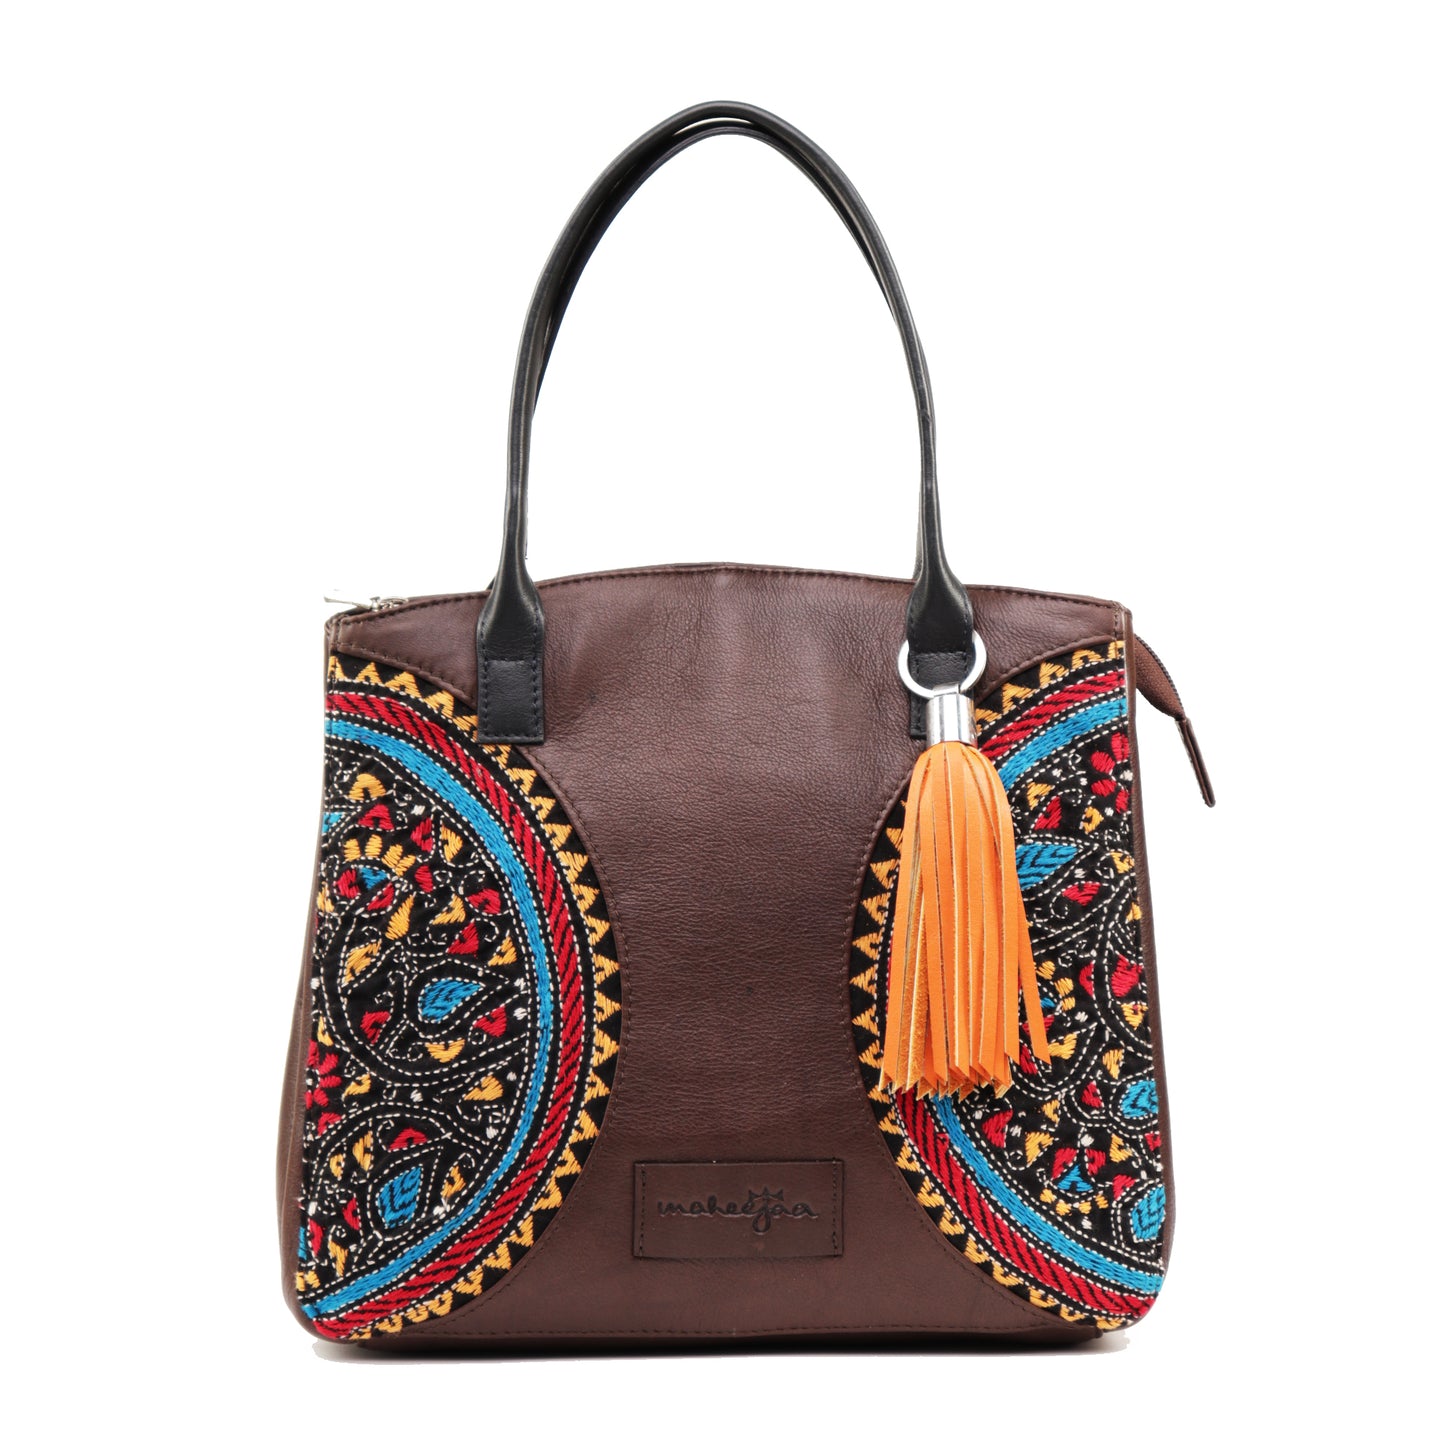 Genuine Leather-Kantha Handcrafted Tote Bag Women (Brown, Black)